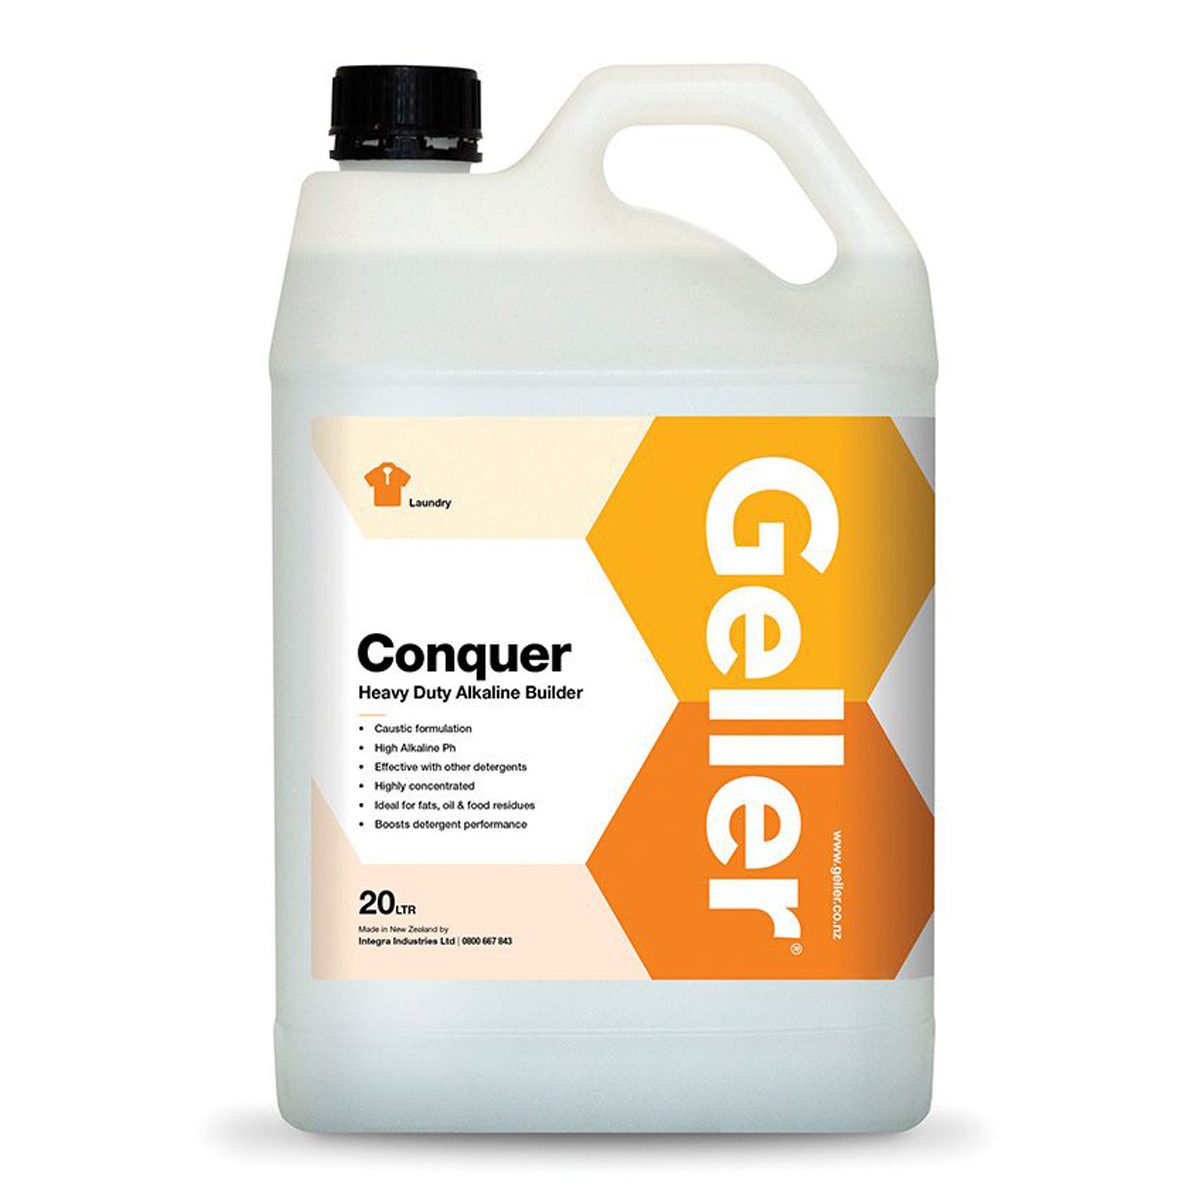 cleaning-products-laundry-geller-conquer-hd-alkaline-builder-20L-litre-heavy-duty-alkaline-builder-for-break-wash-heavily-soiled-textiles-dispensed-automatic-laundry-systems-vjs-distributors-CONQUER20